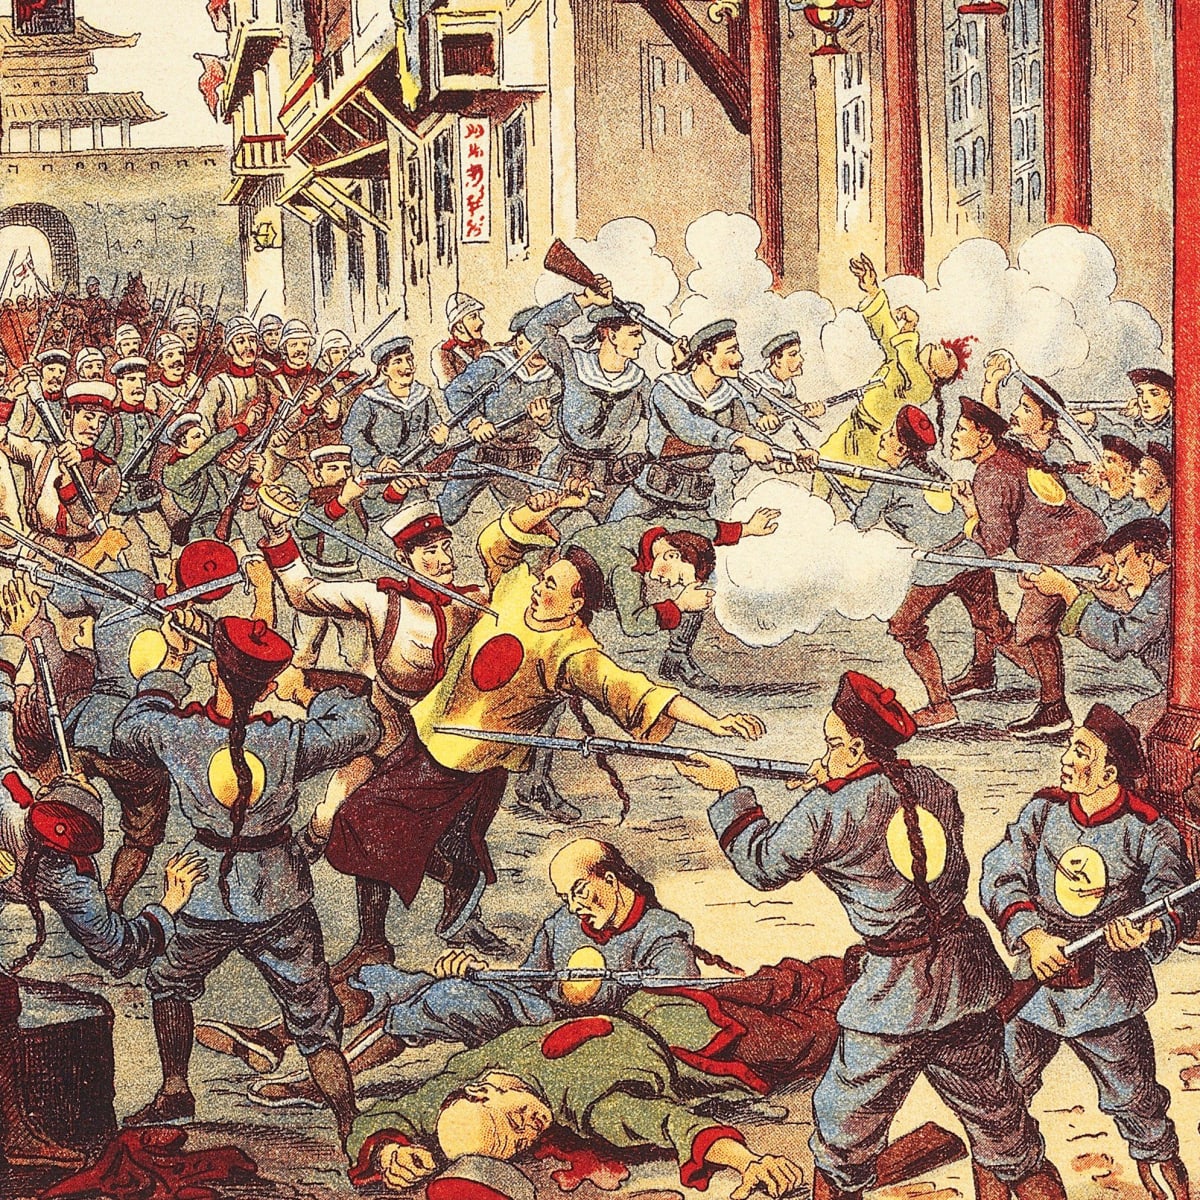 <p>The Boxer Rebellion was an uprising against foreigners that occurred in China begun by peasants but eventually supported by the government.</p><ol start="3"><li><p>The Boxer rebellion led to a weakened state of the Qing Dynasty and led to the end of the dynastic cycle with the Republic of China being developed.</p></li></ol>